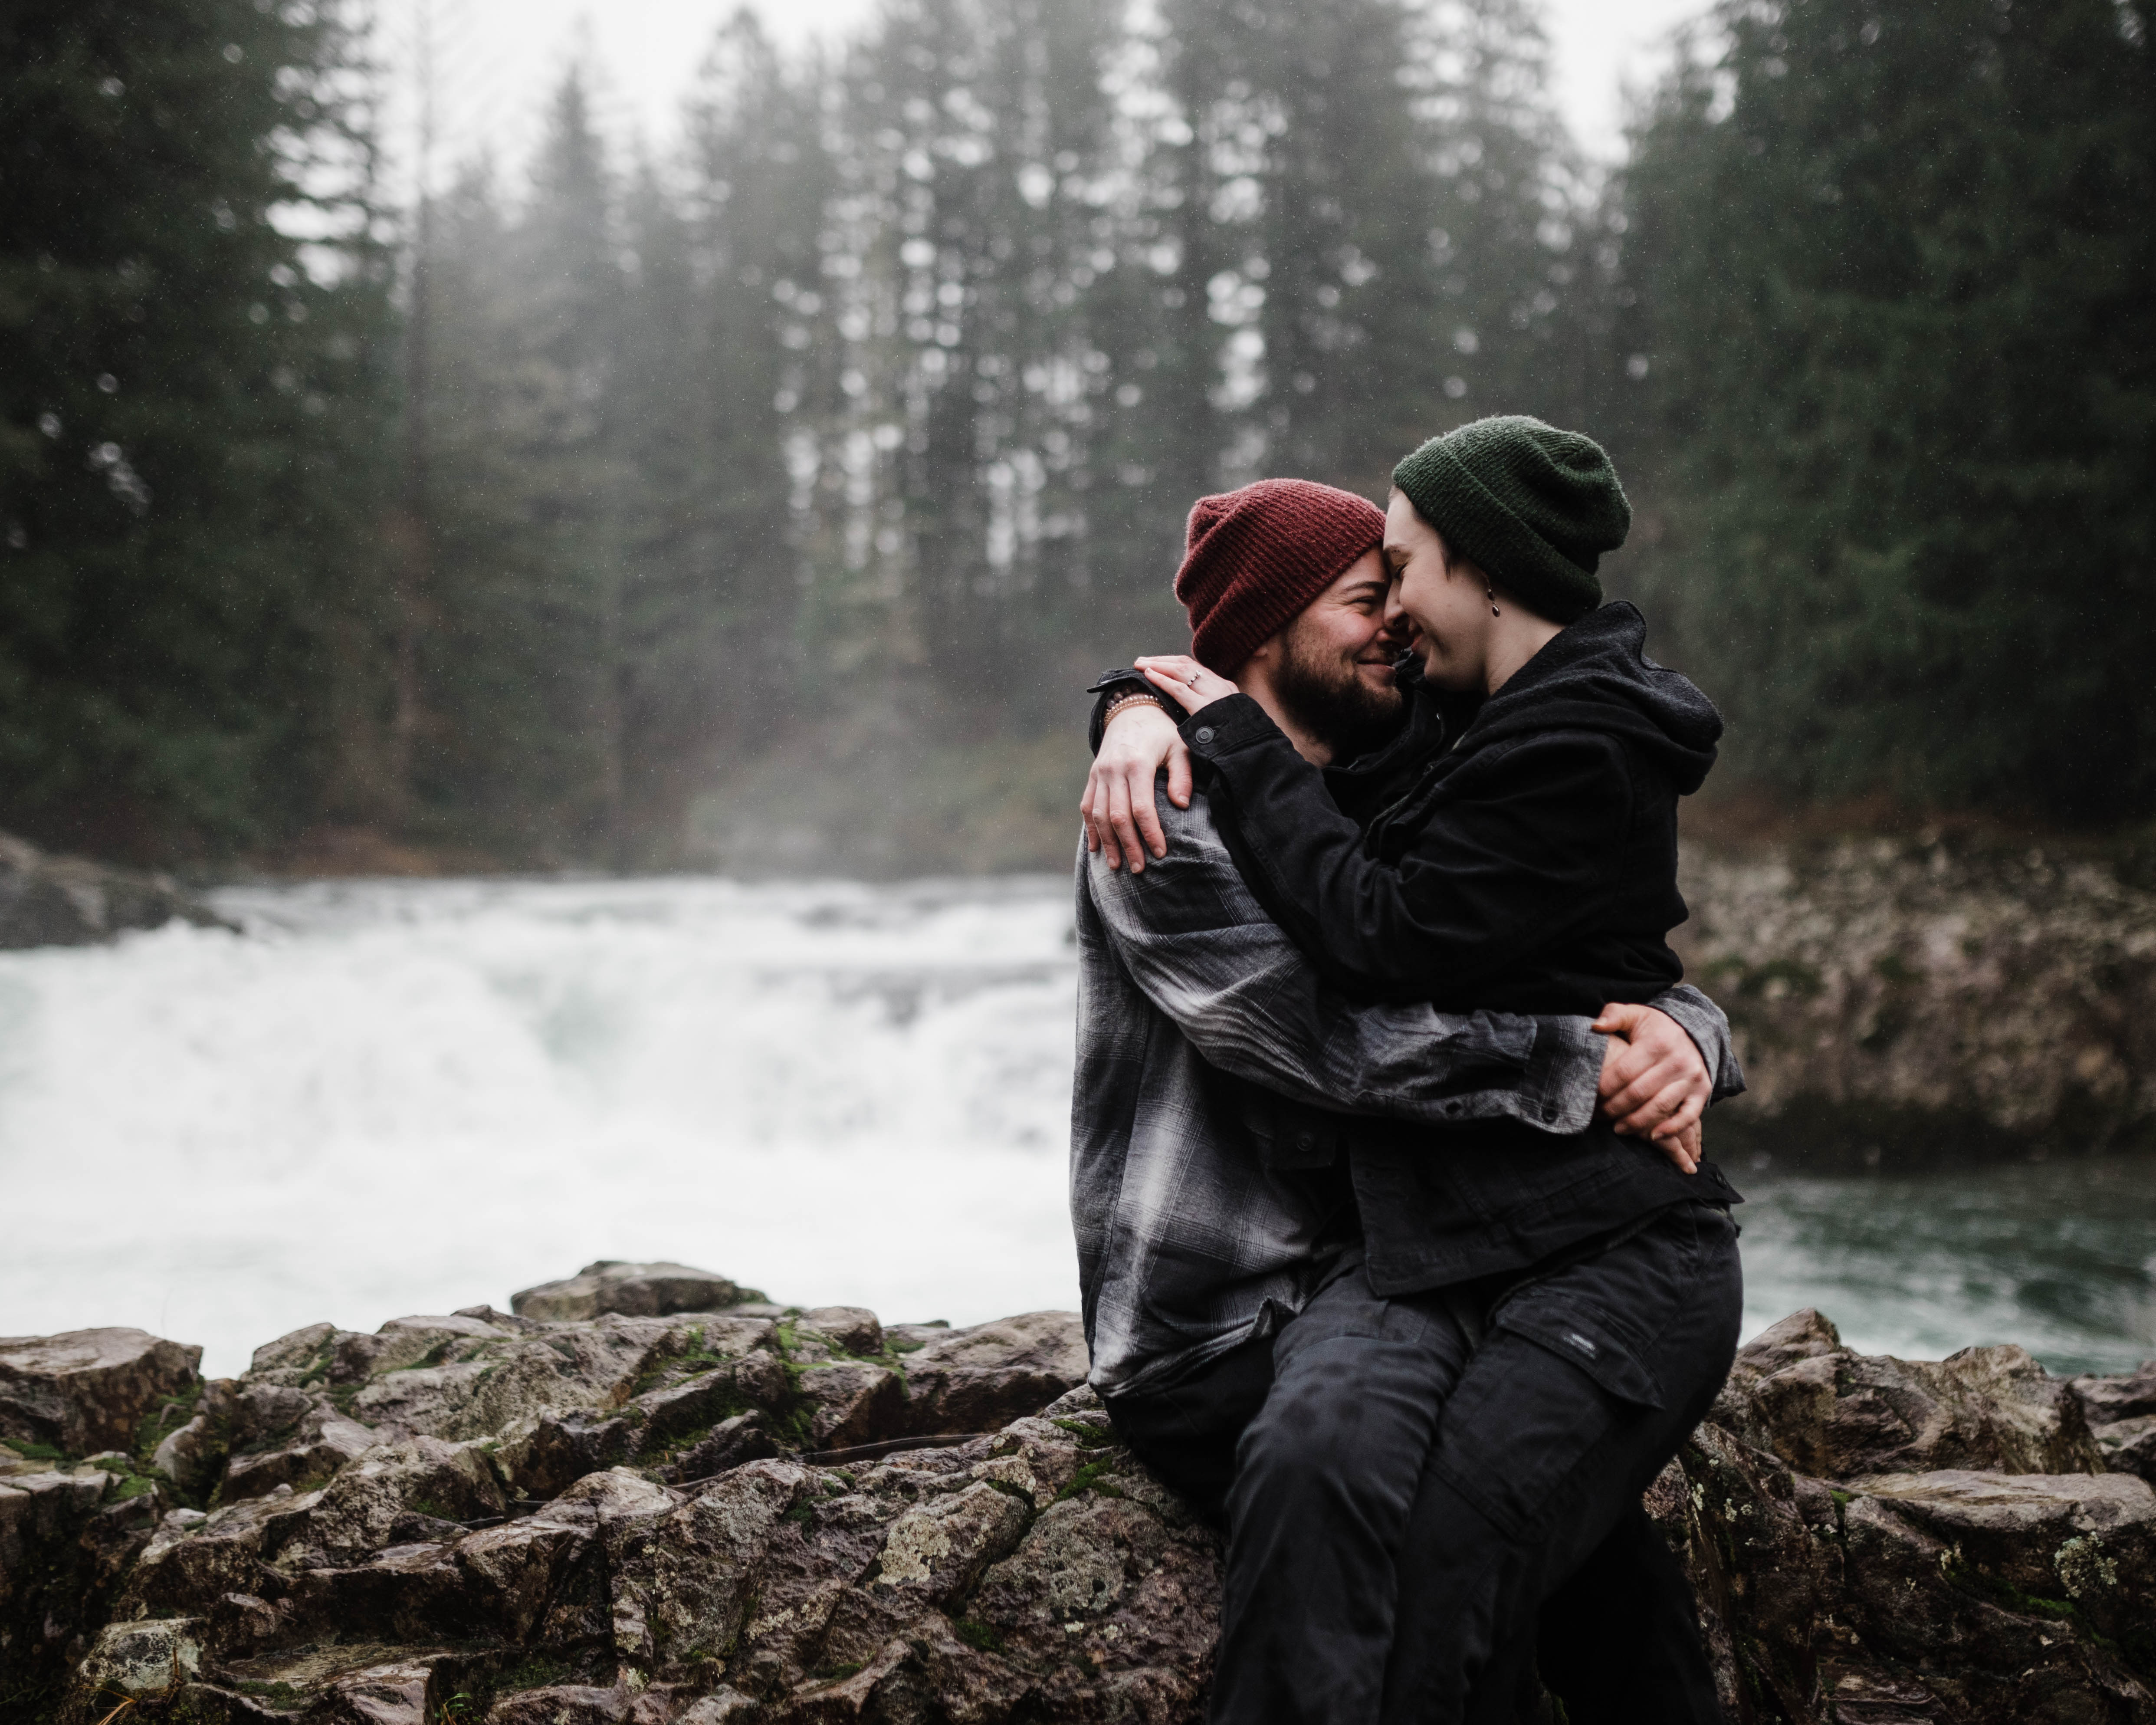 Taylor and Kade’s Engagement Session at Moulton Falls Park